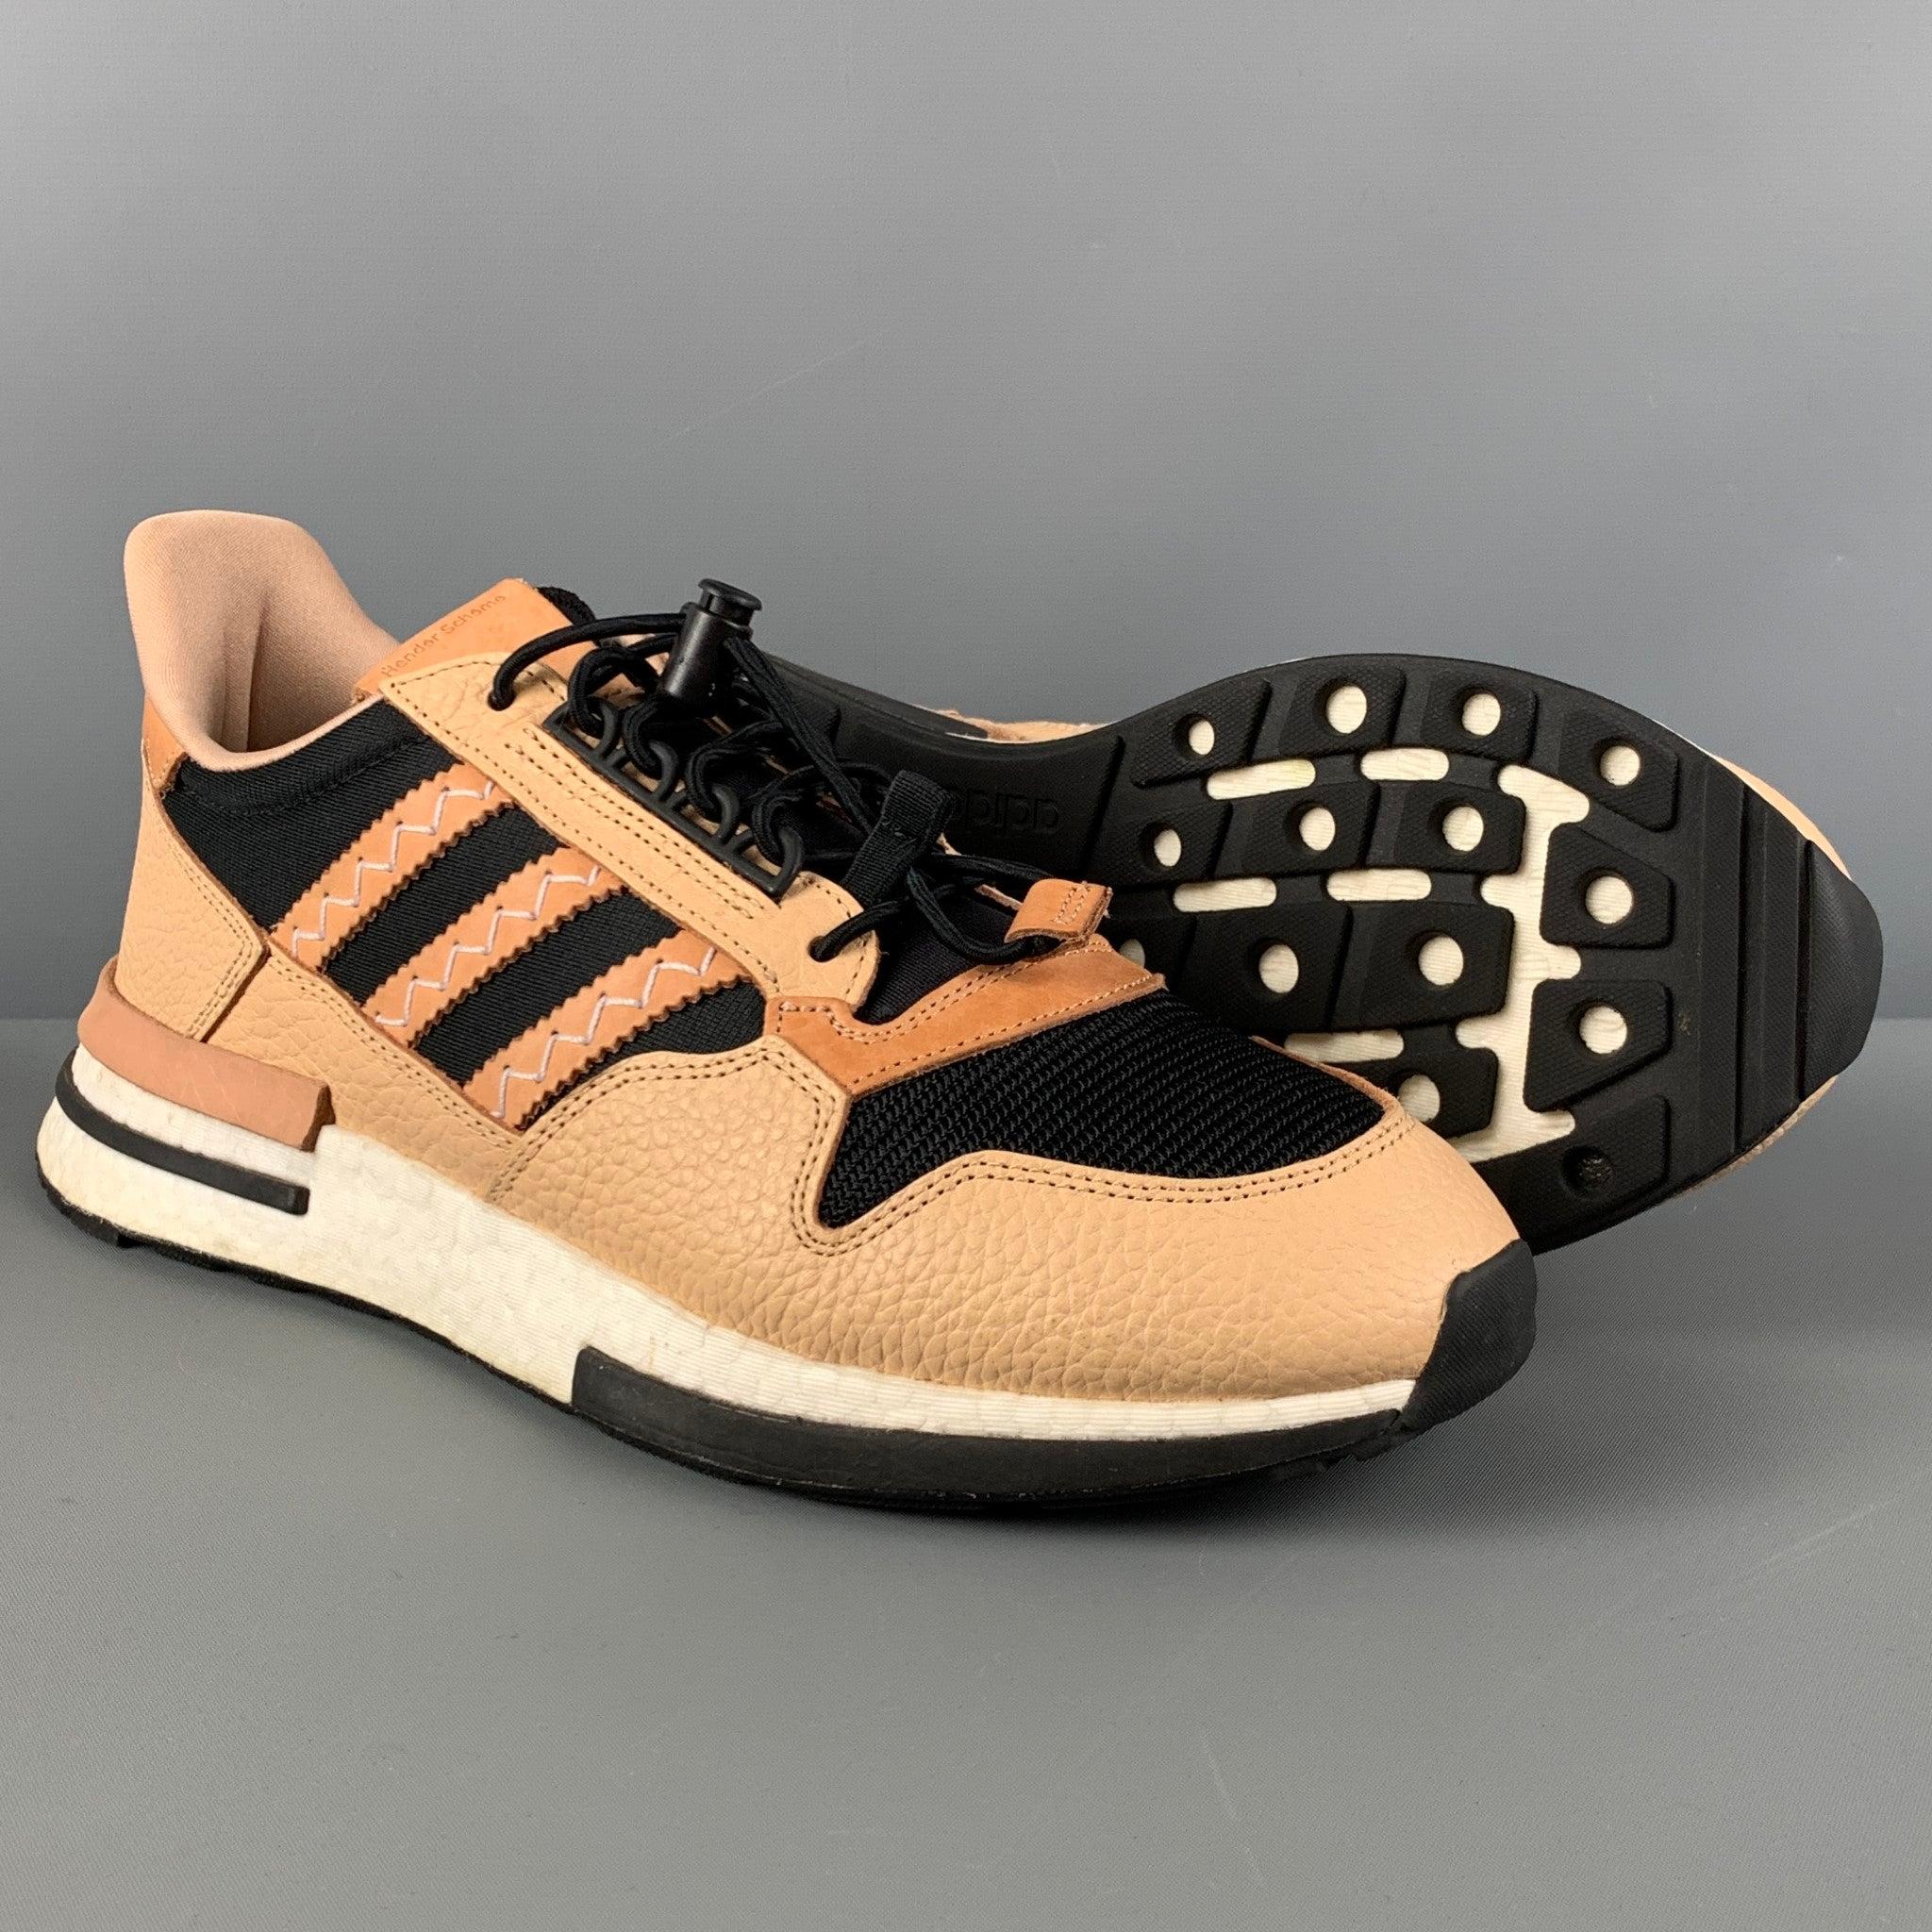 ADIDAS x HENDER SCHEME Size 10.5 Tan Black Leather Lace Up Sneakers In Good Condition For Sale In San Francisco, CA